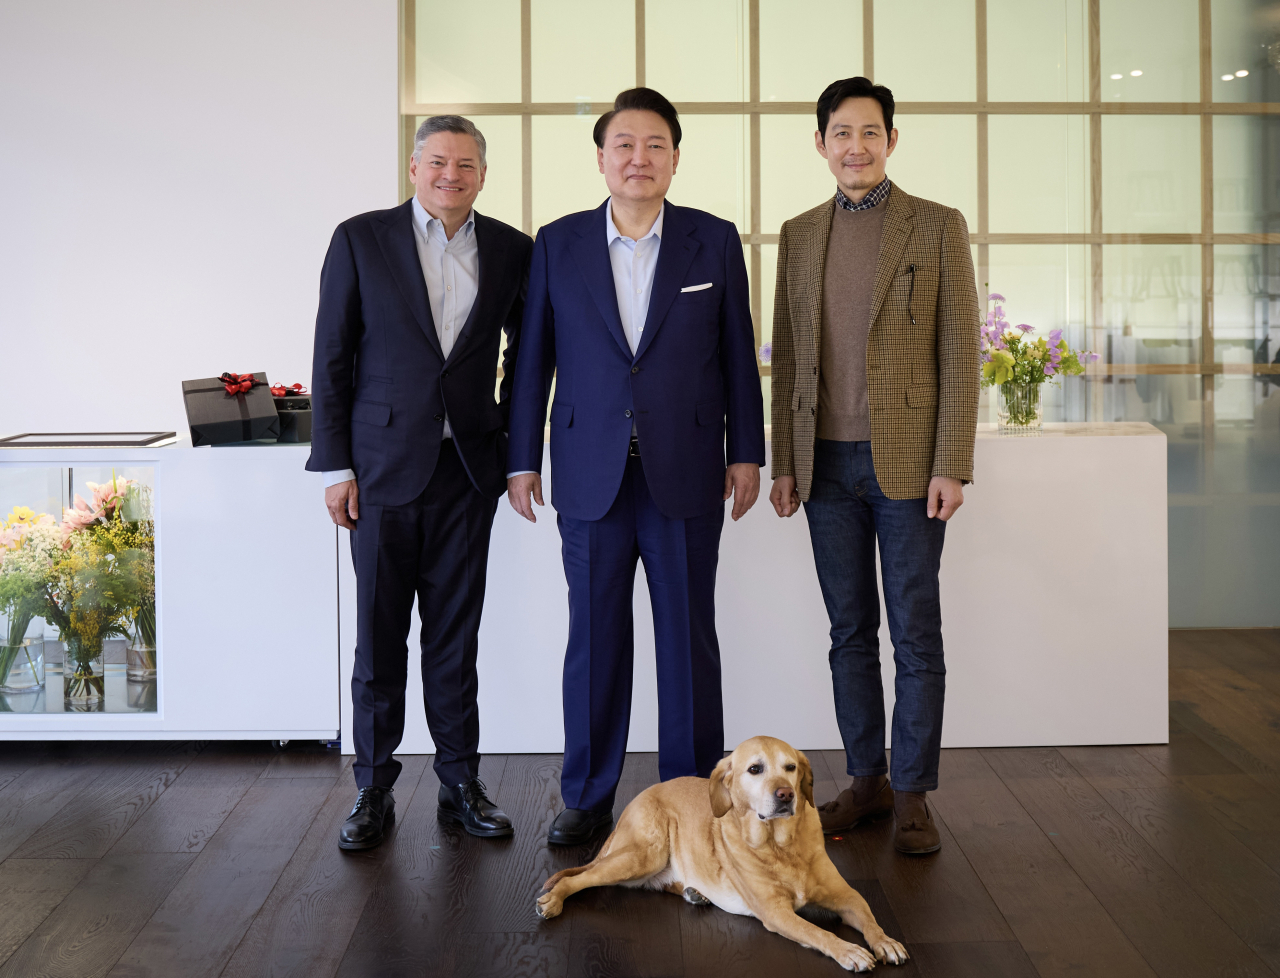 President Yoon Suk Yeol (center) poses for a photo with Netflix co-CEO Ted Sarandos (left) and 